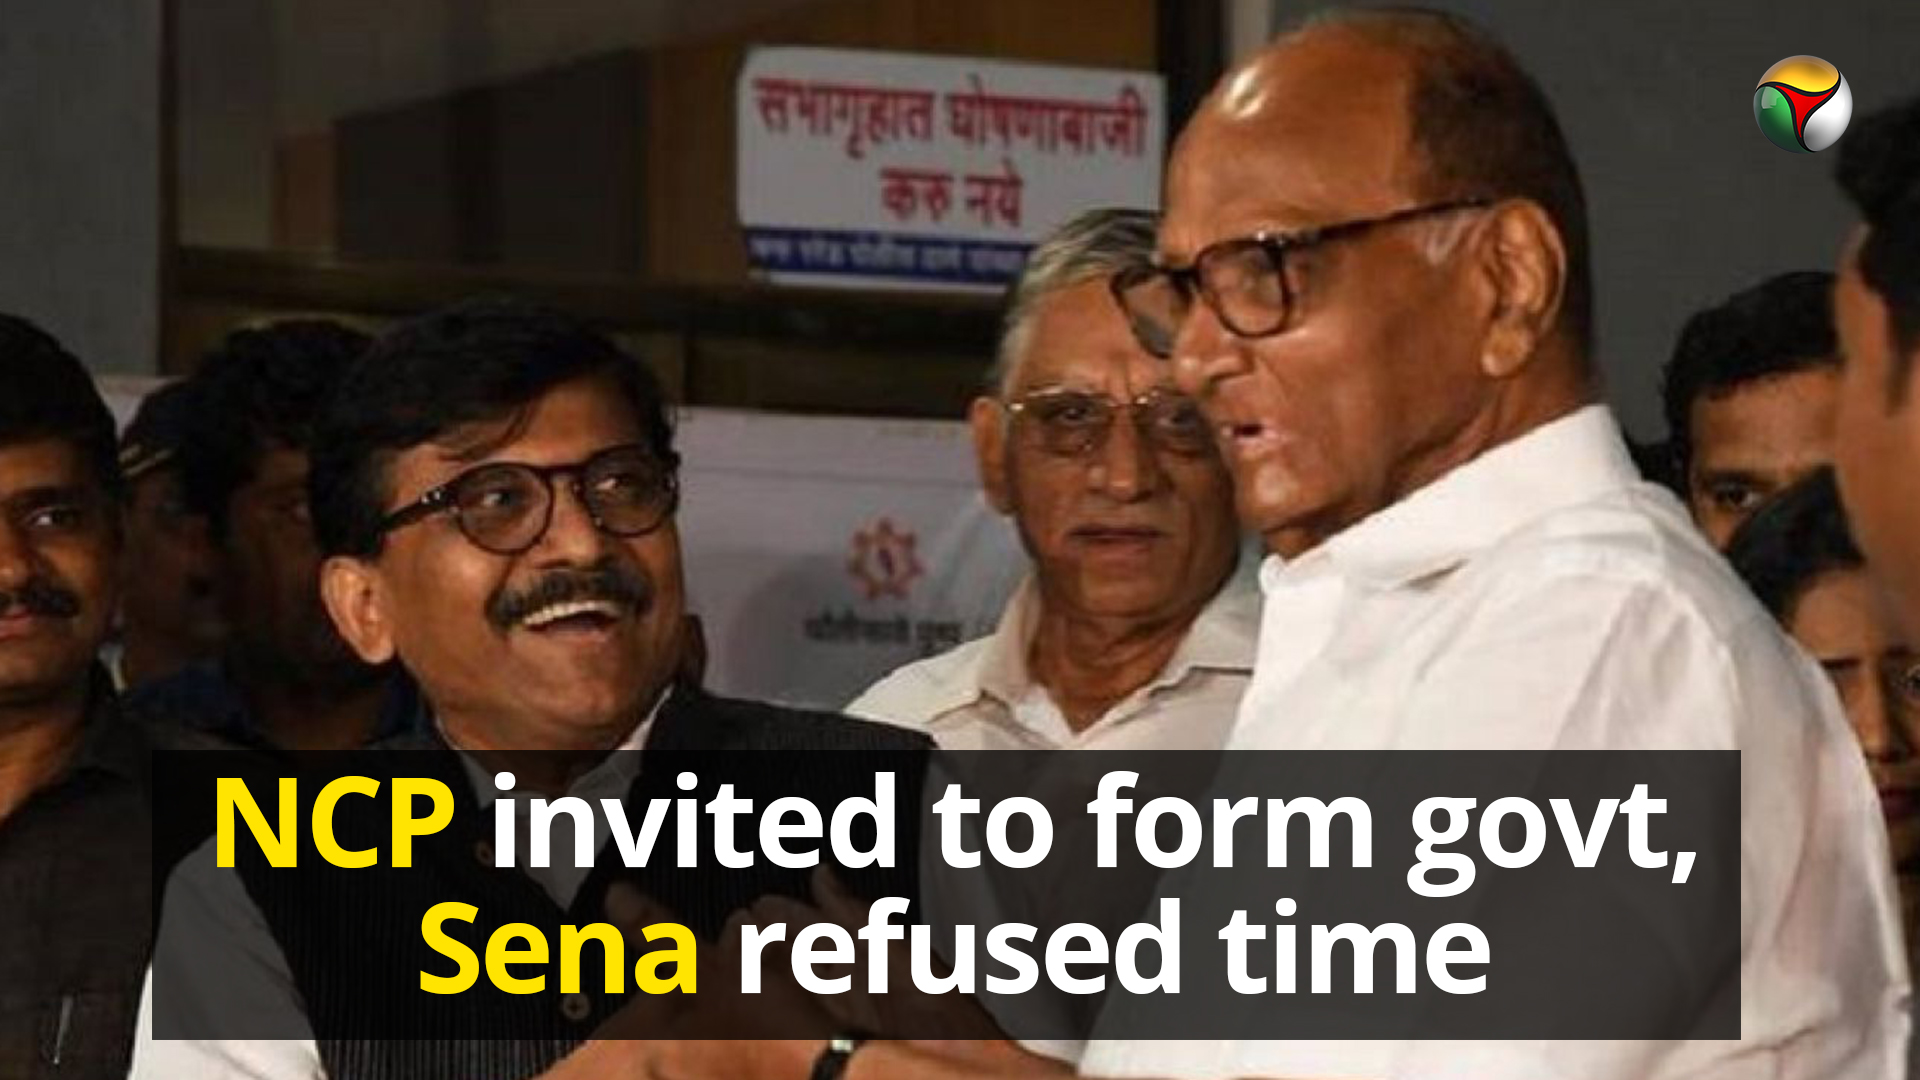 NCP invited to form govt, Shiv Sena refused more time